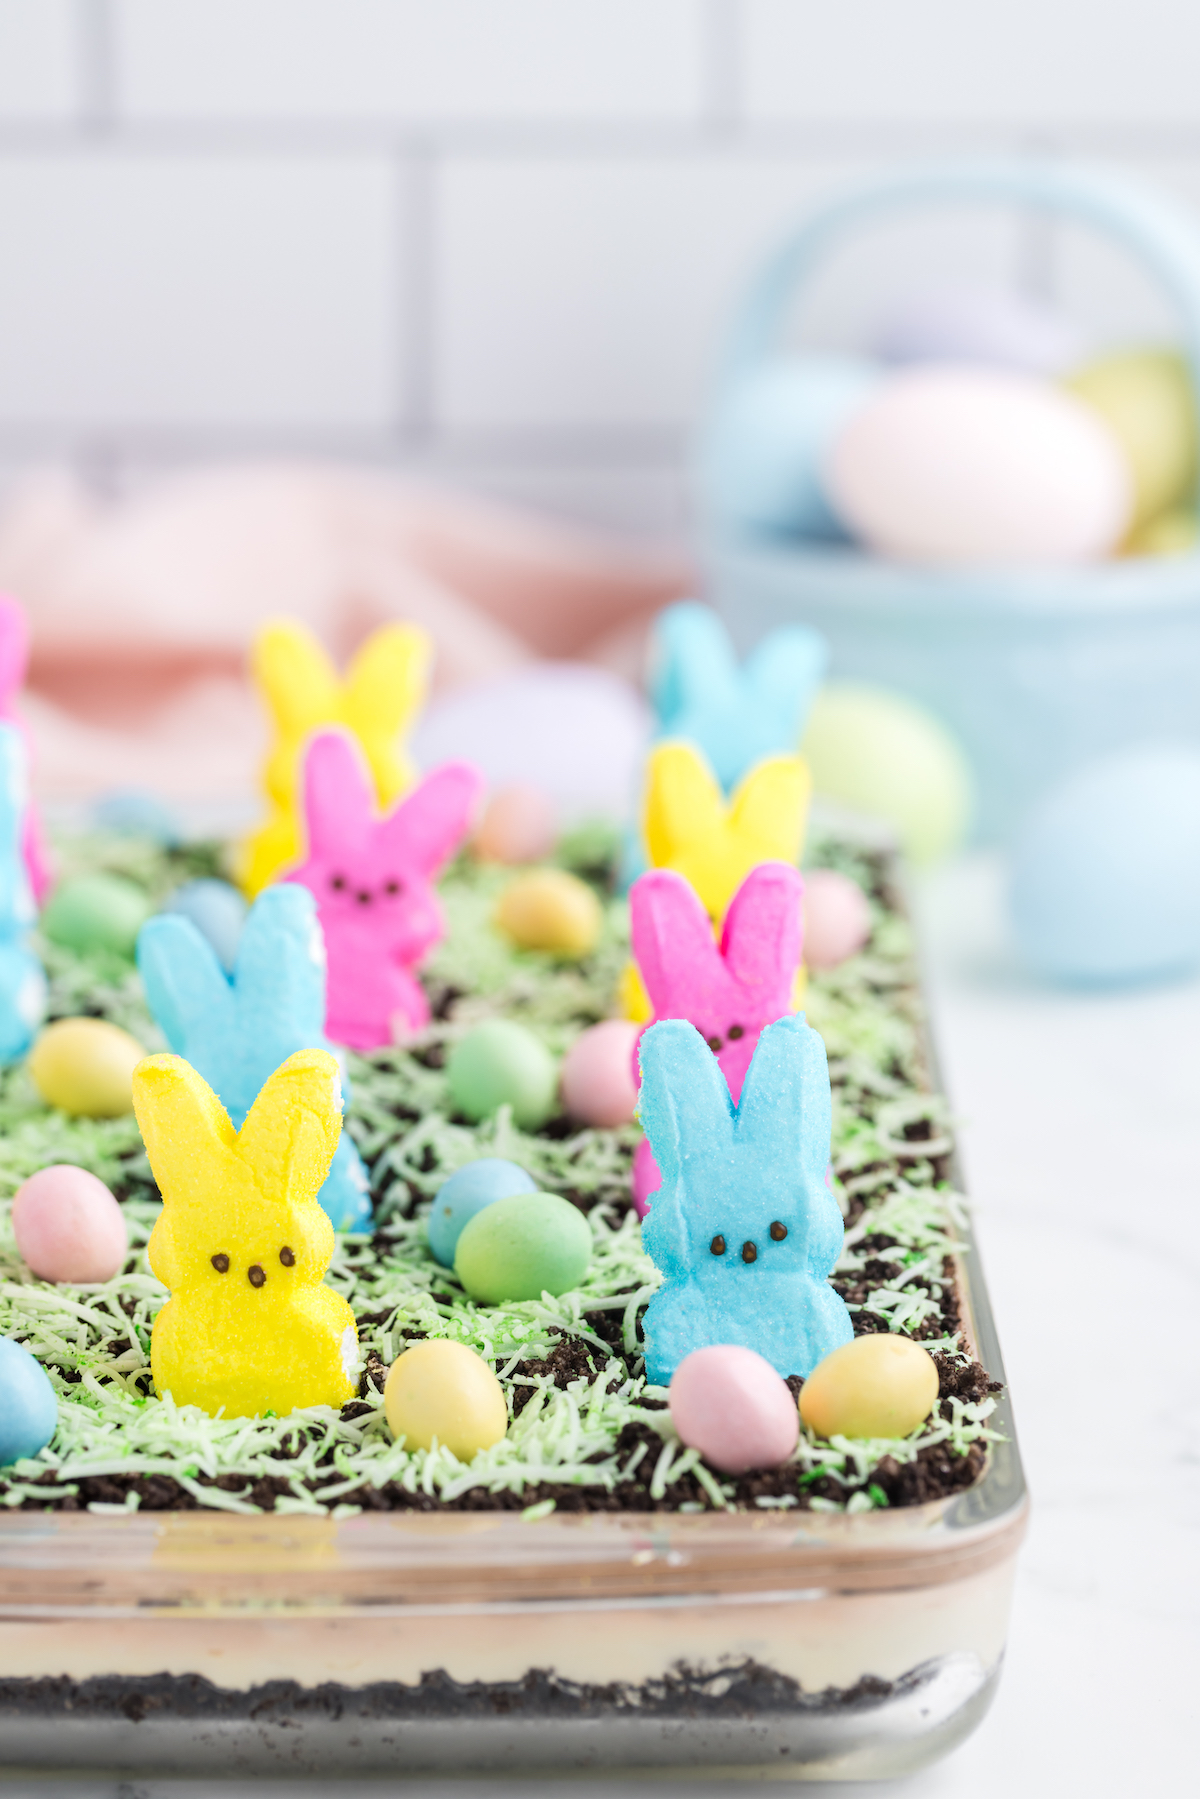 peeps dirt cake with decorative easter basket in background